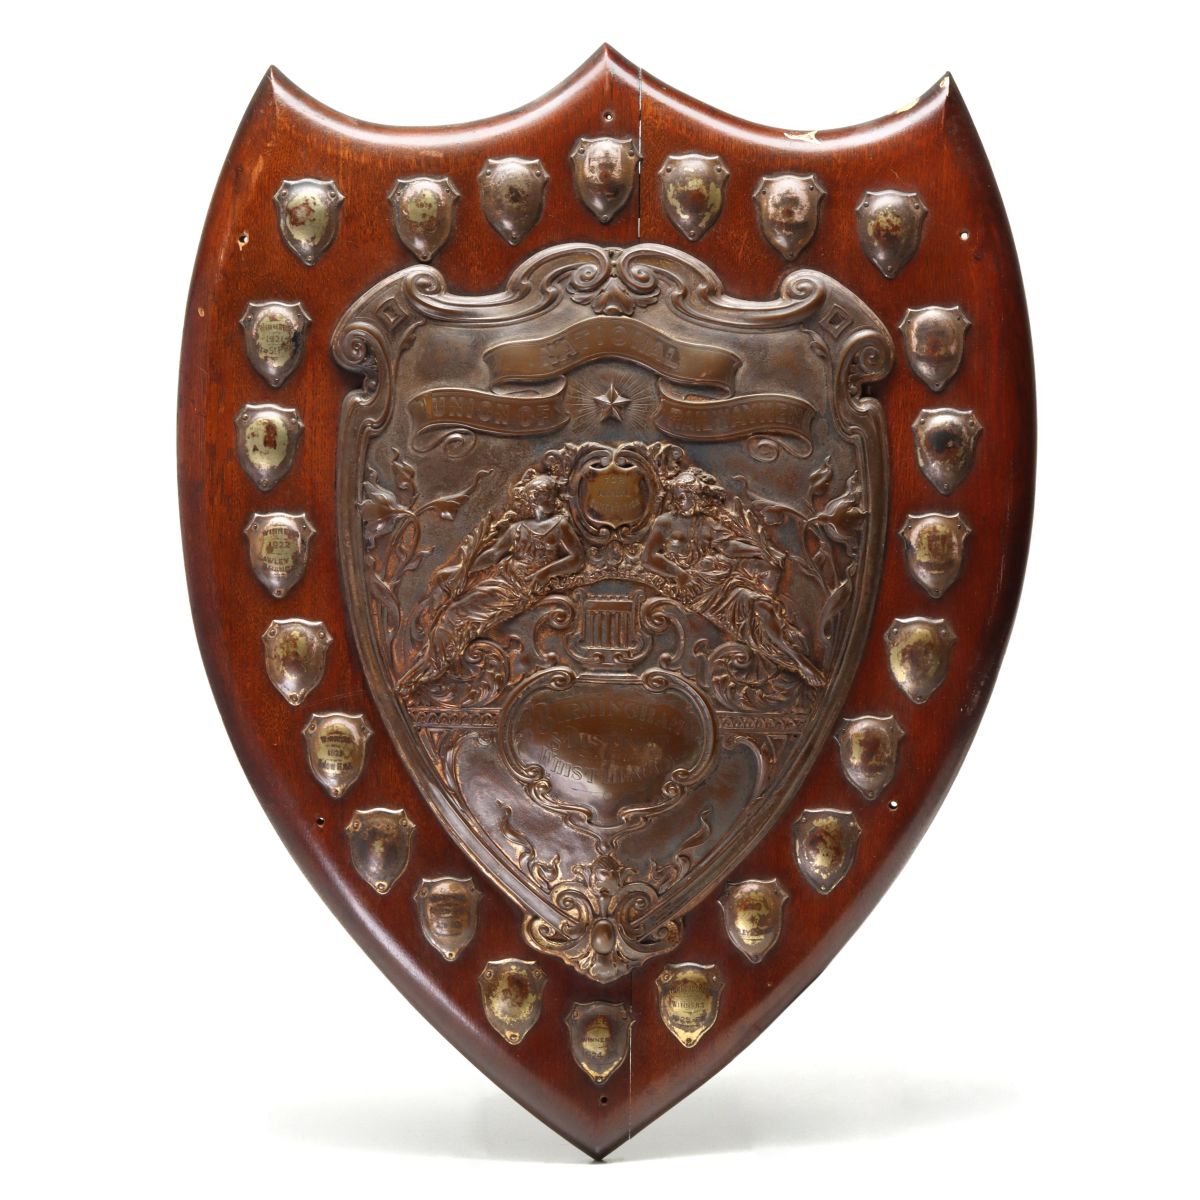 A NATIONAL UNION OF RAILWAYMEN WHIST CHAMP PLAQUE